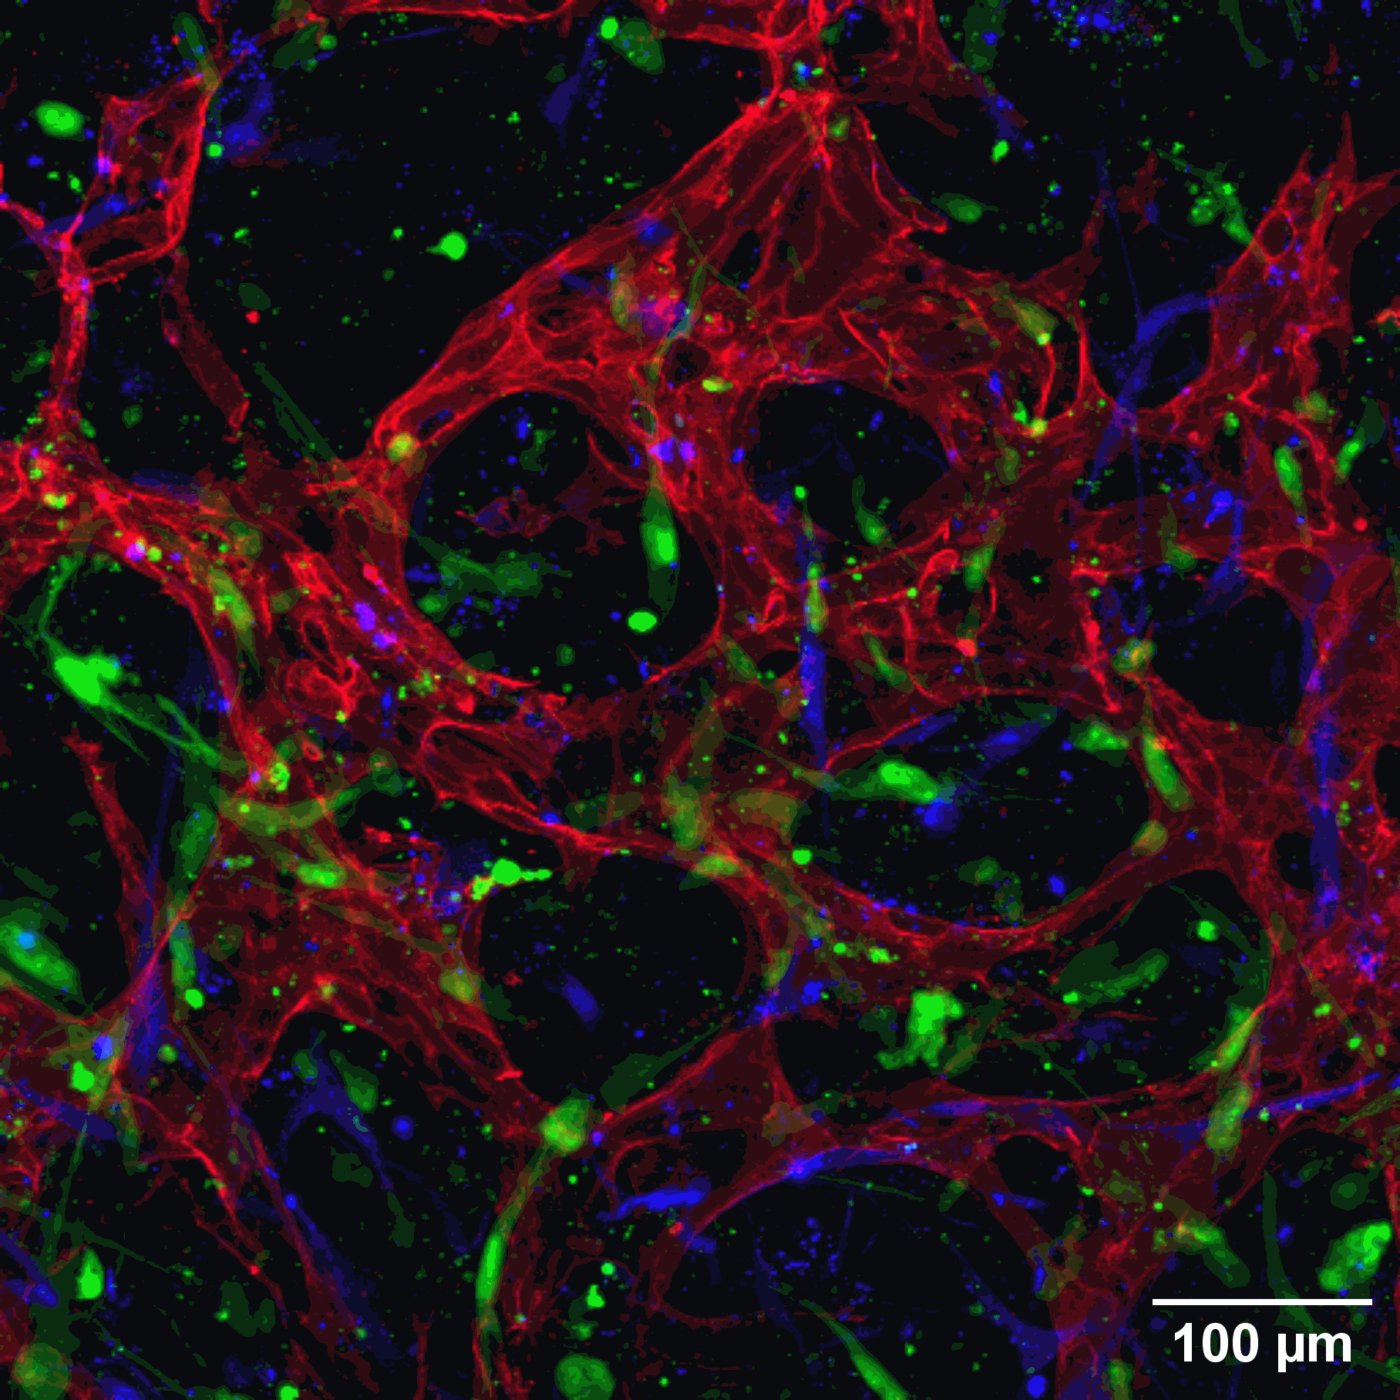  Agathe Figarol - Cerebral microvessels developped in vitro. Red : human brain endothelial cells, green : astrocytes, blue : pericytes.